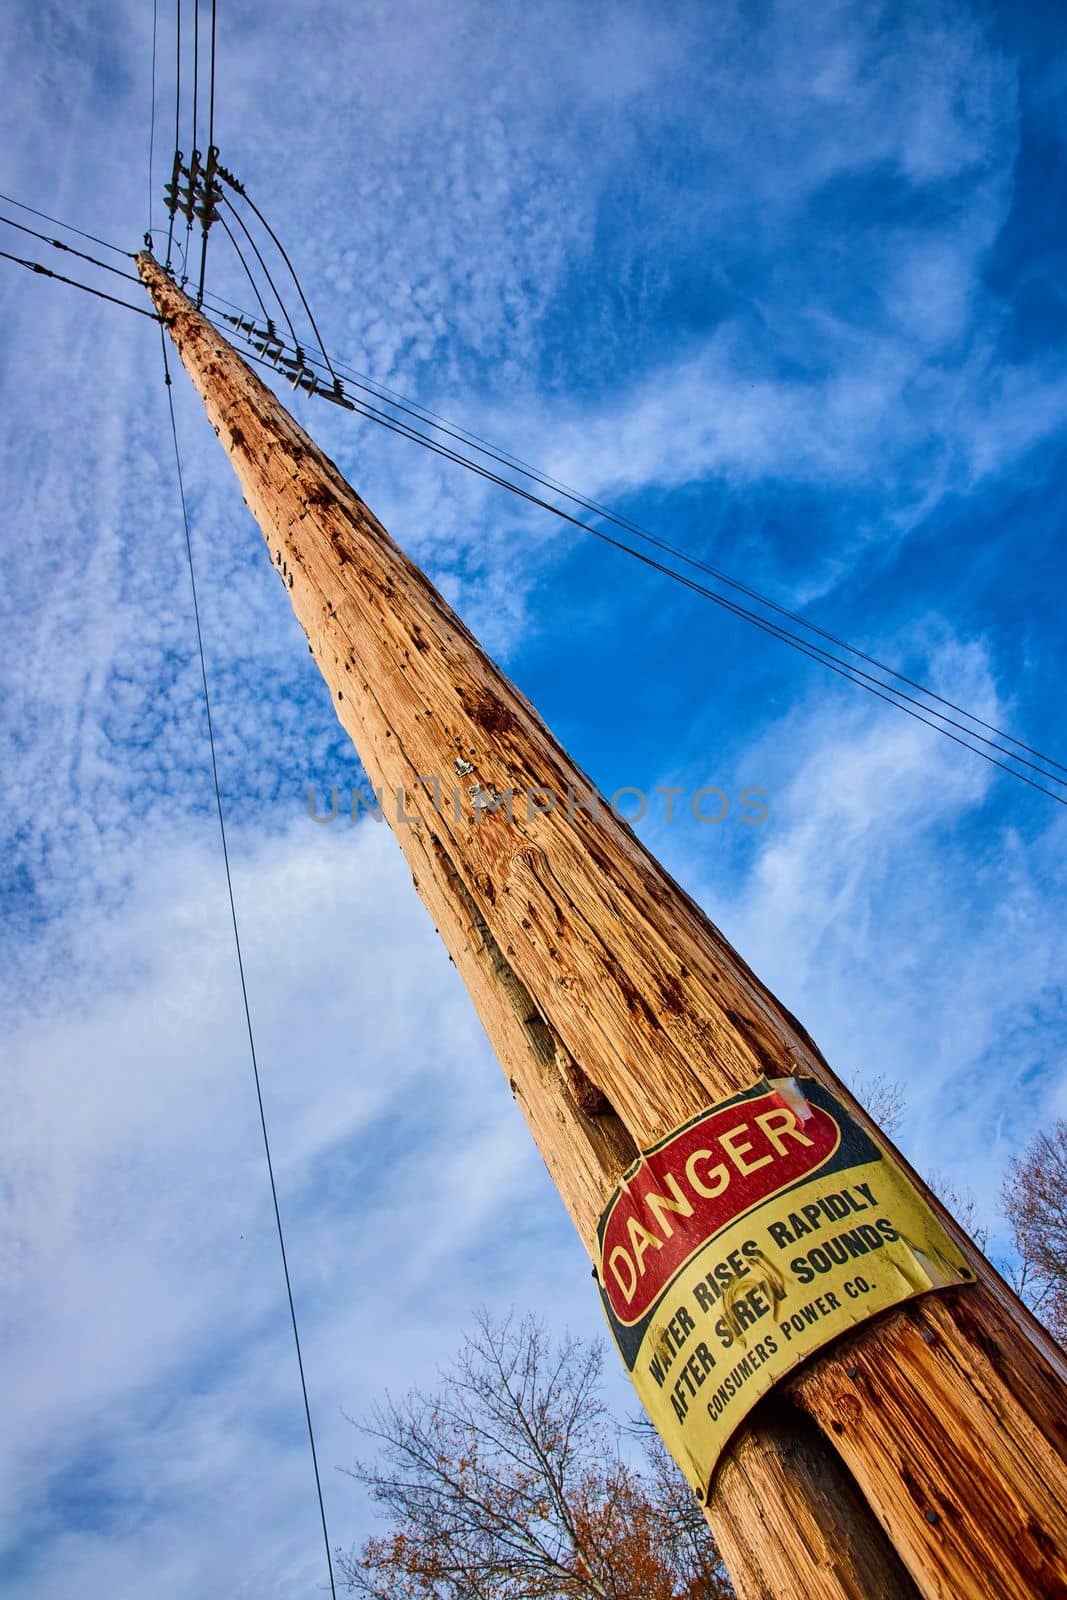 Image of Looking up at telephone pole with large DANGER sign posted about flooding area